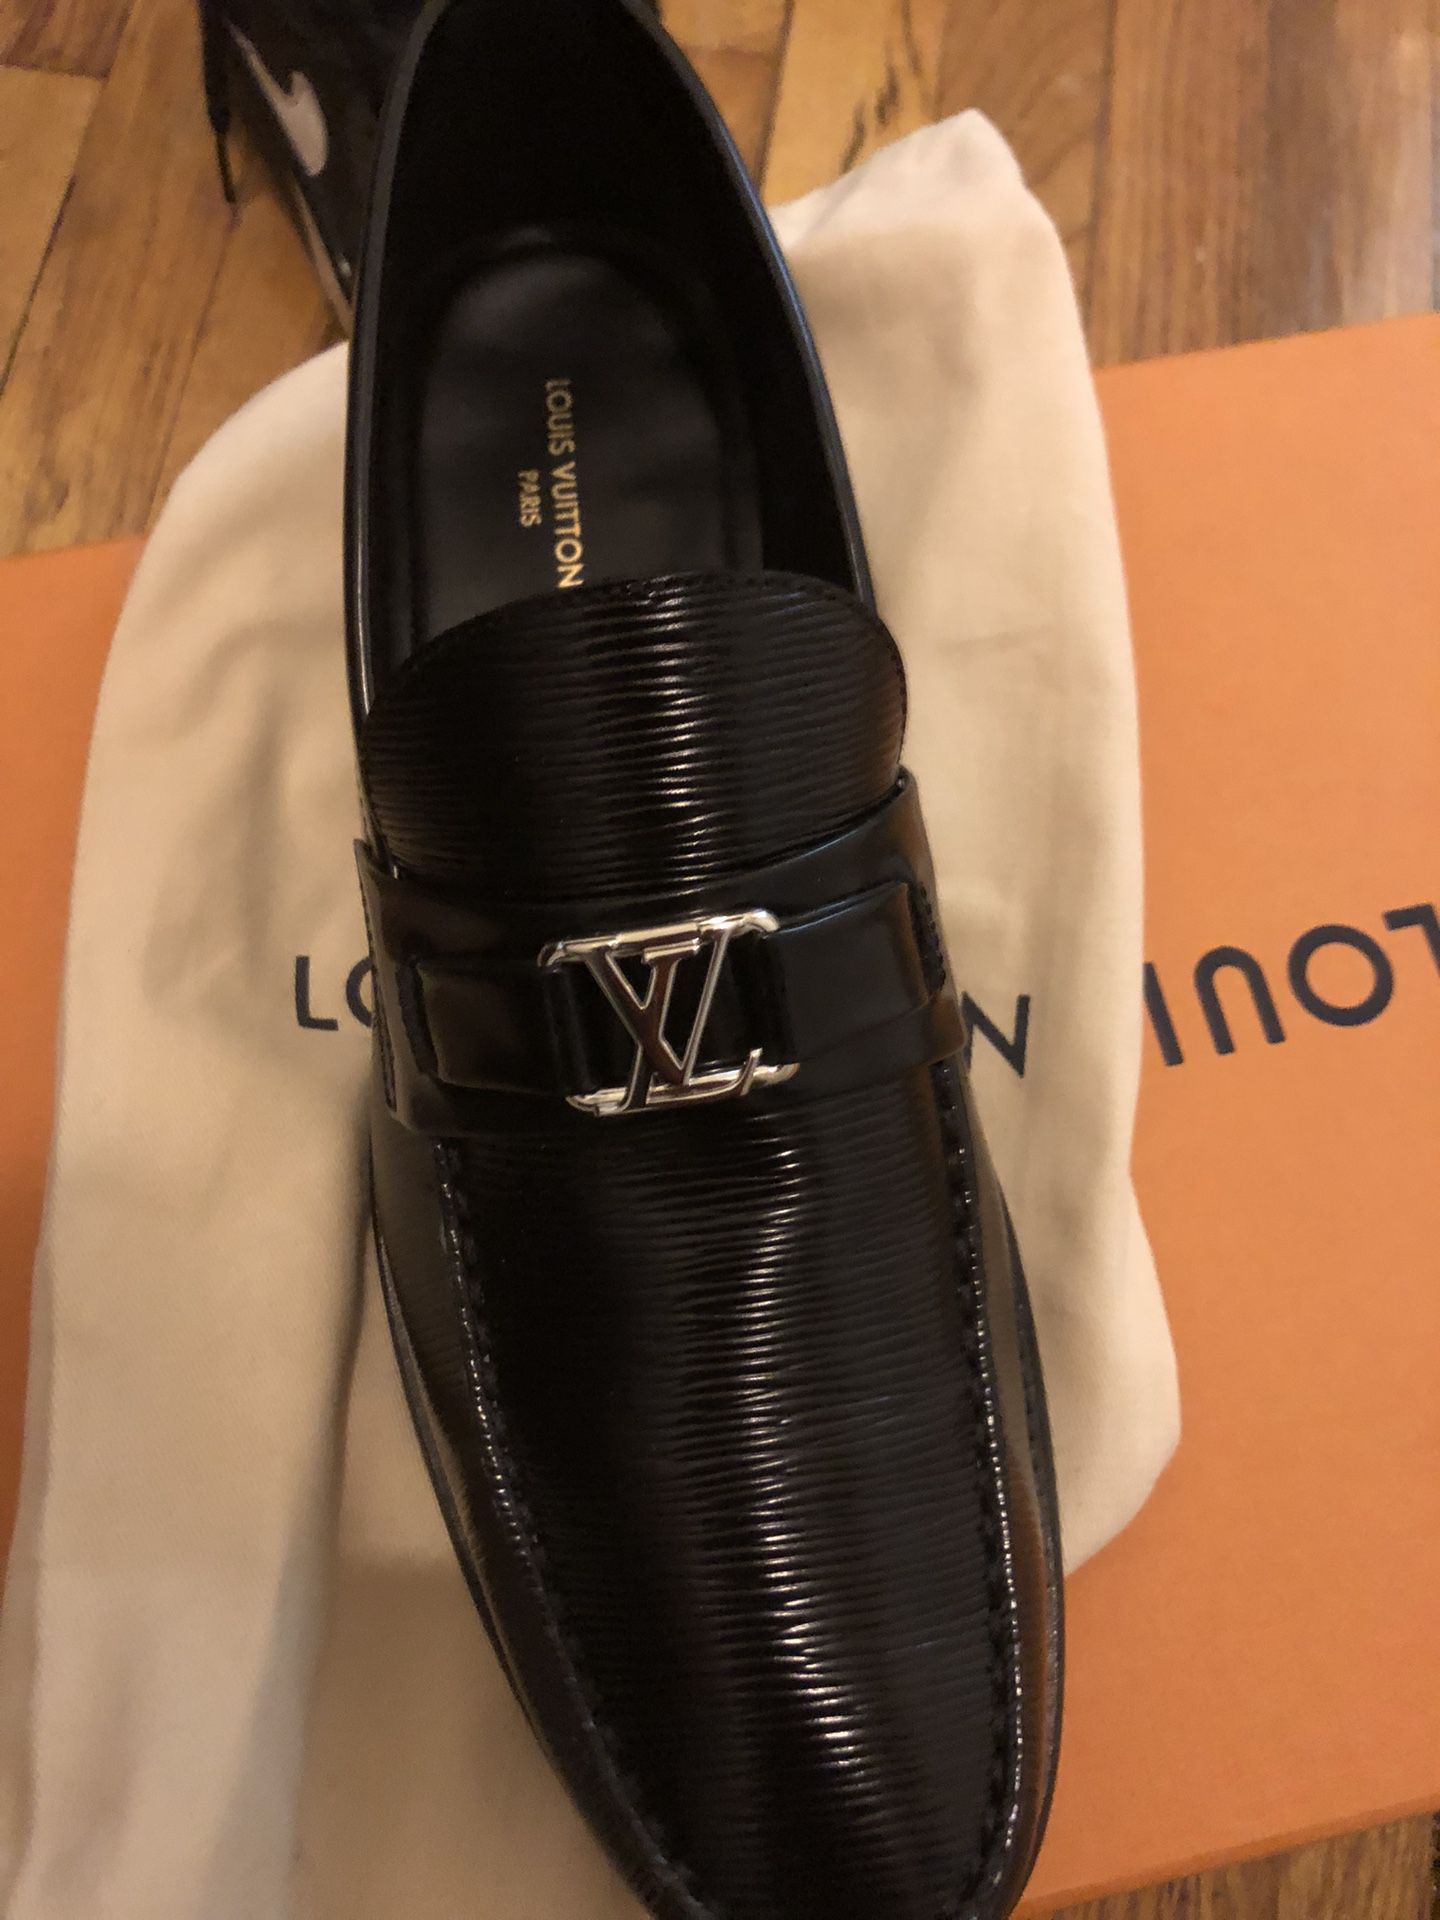 LV Shoes Size 11 Wore One Night With belt for Sale in New York, NY - OfferUp